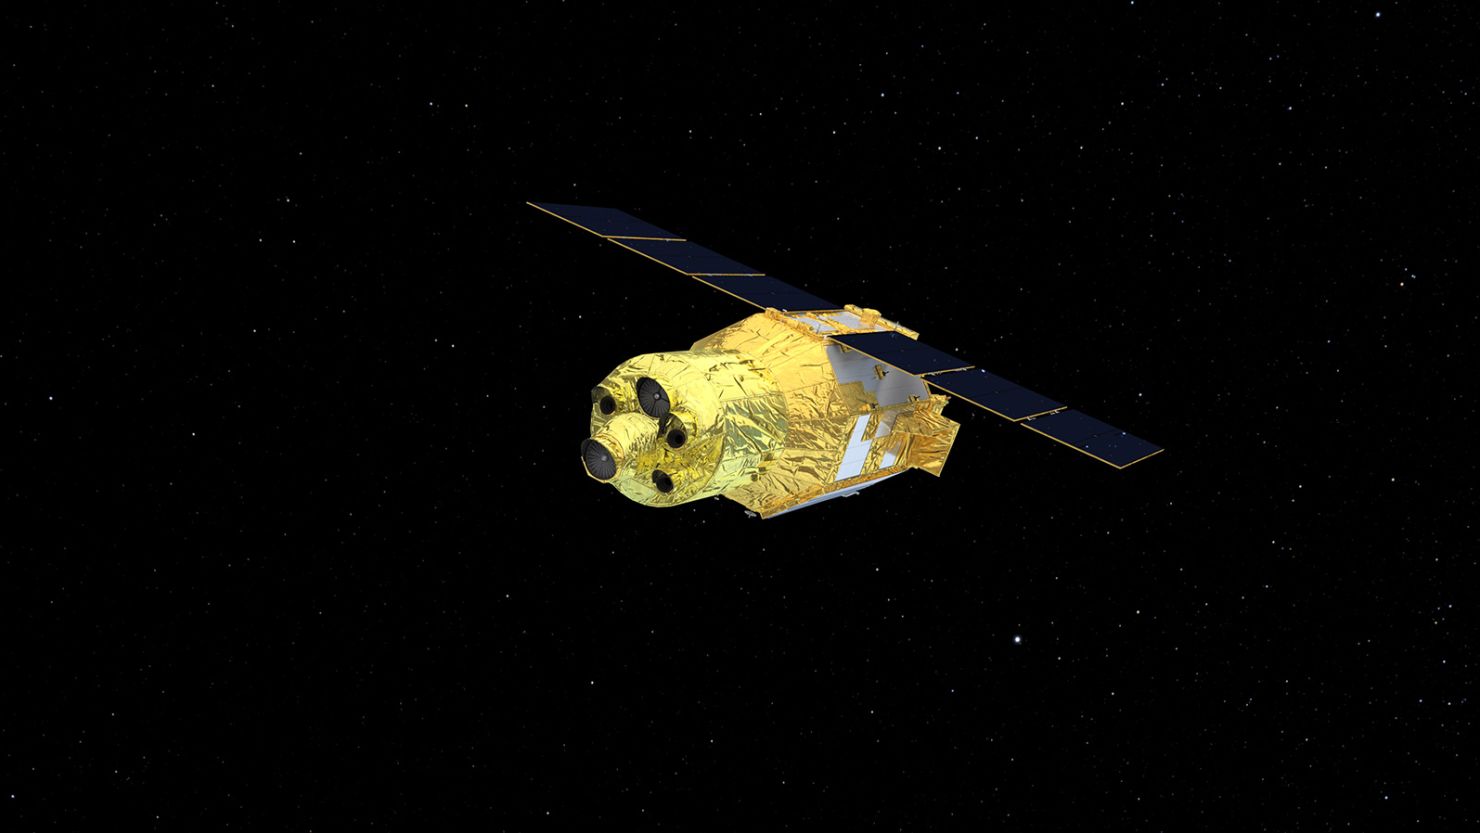 The XRISM spacecraft will look for X-rays emanating from energetic celestial objects.